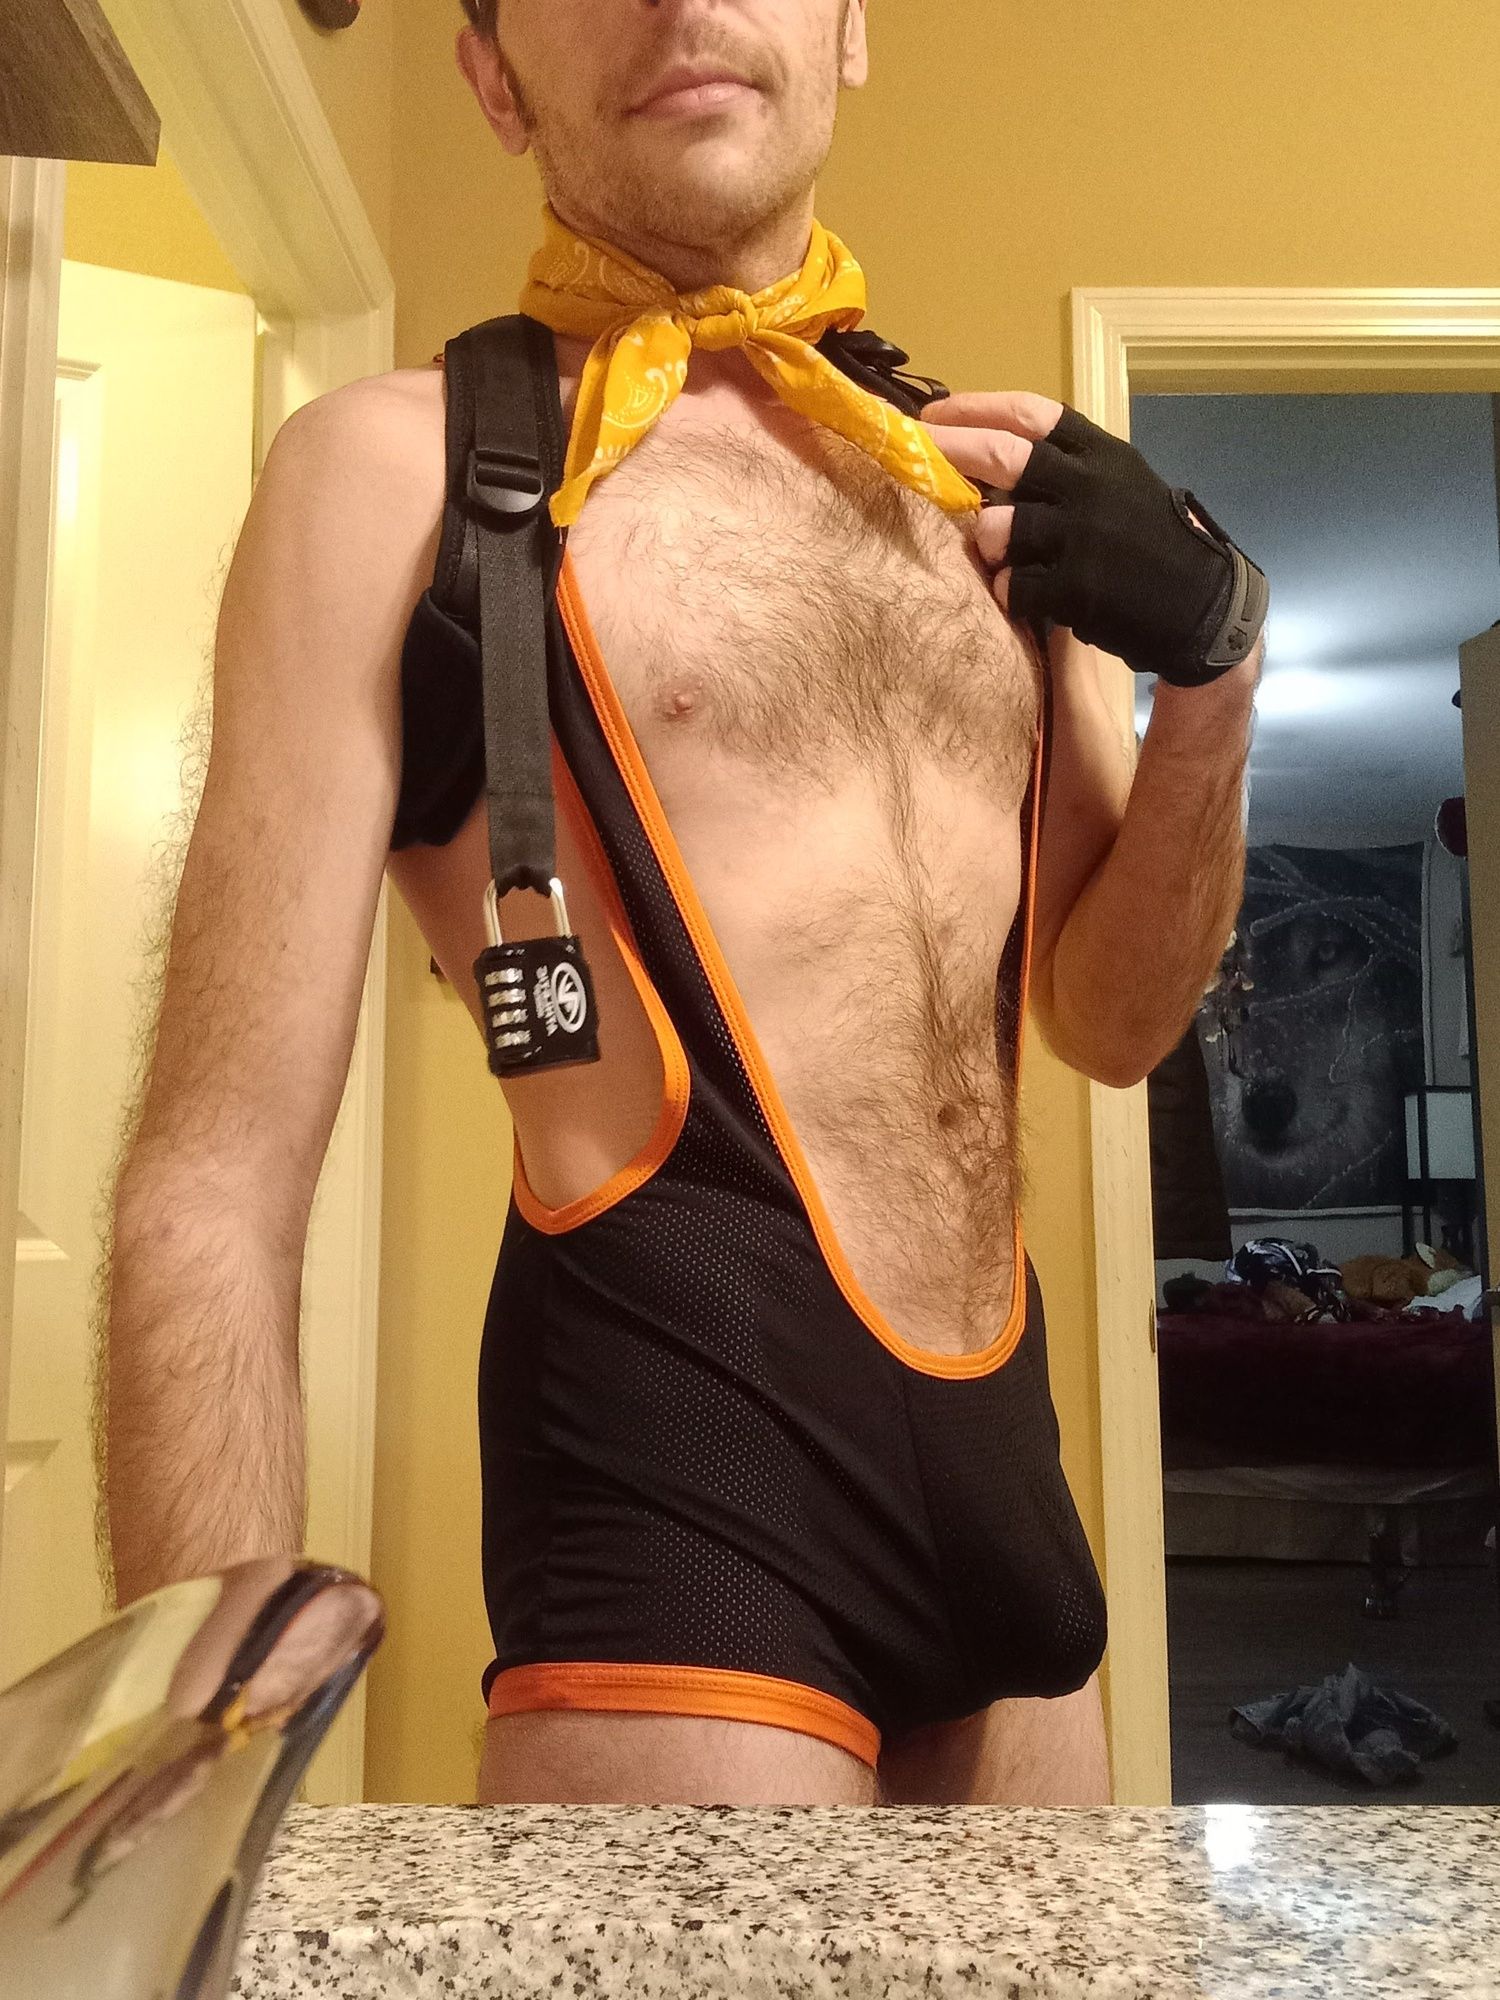 Puppers Showing off in underwear...again #8